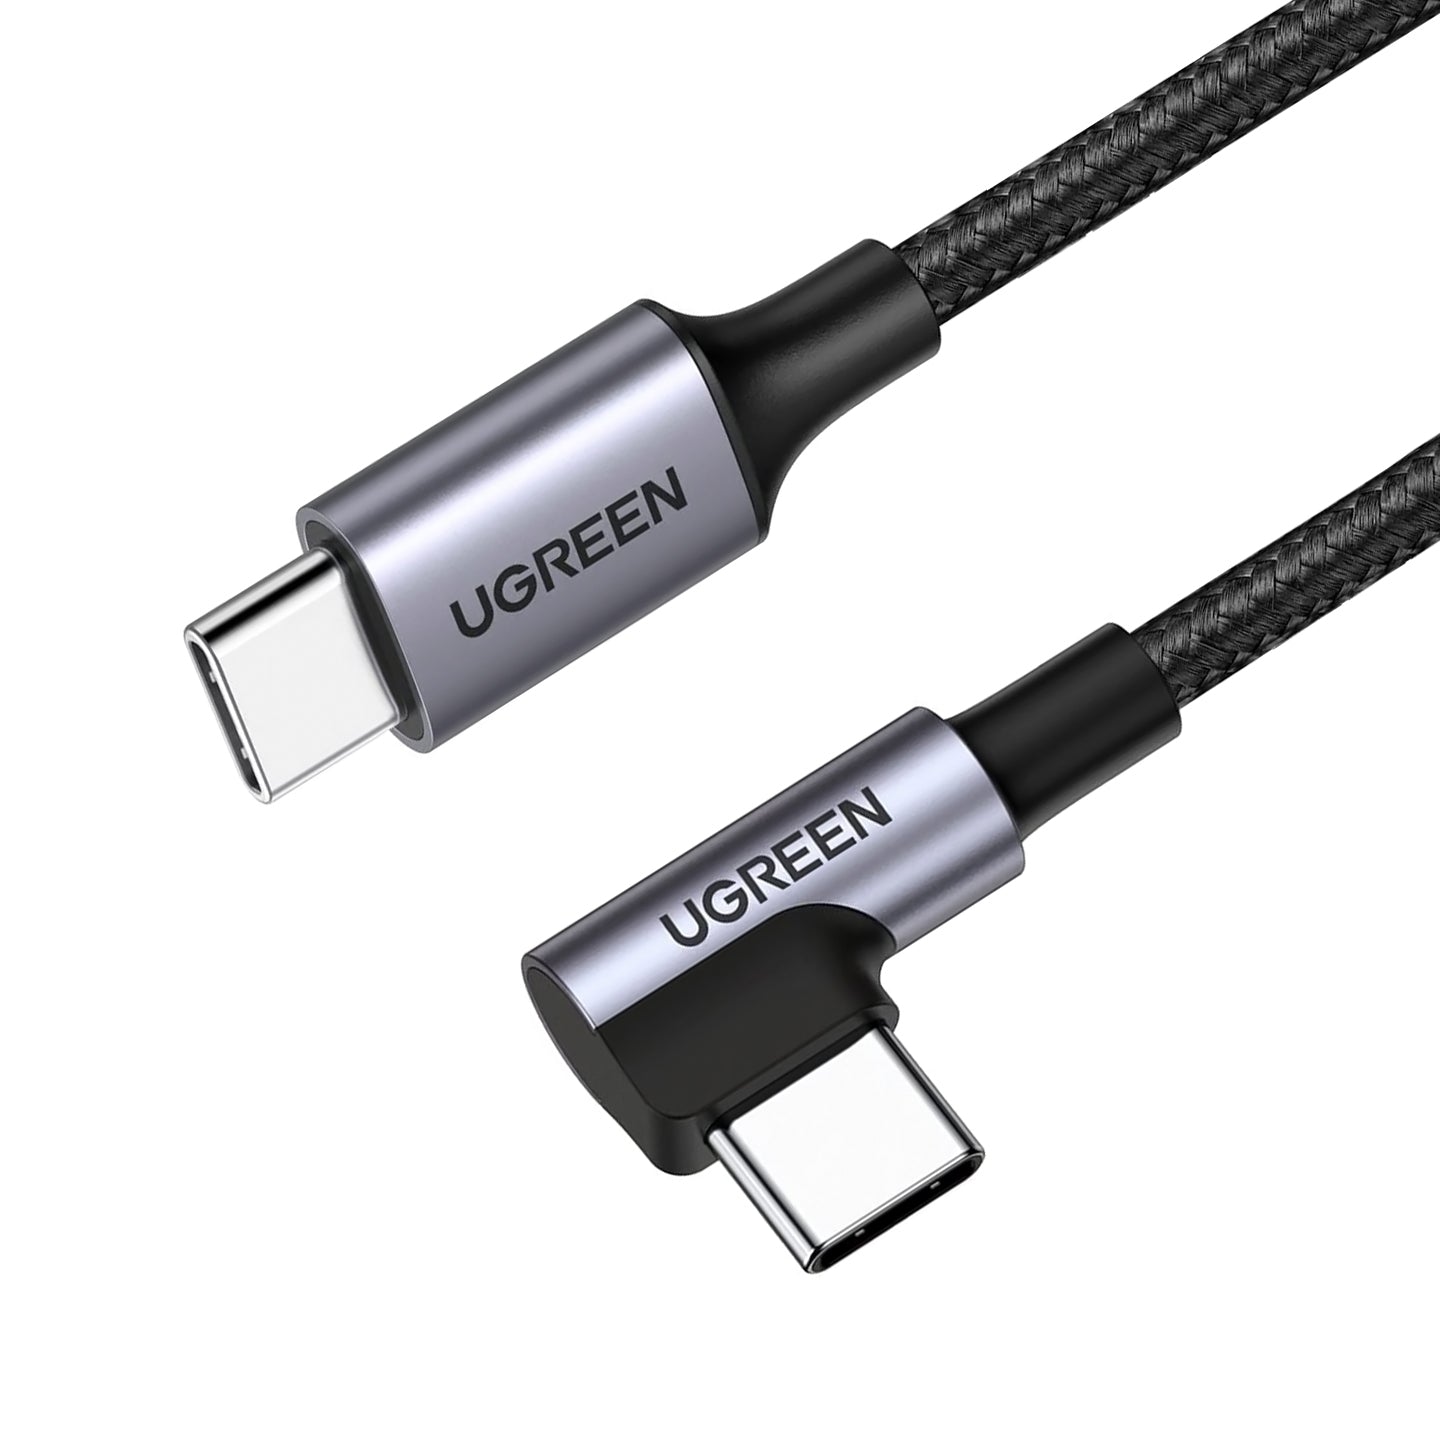 UGREEN 60W PD Type C to Angled USB C Fast Charging Cable for Smartphones and Tablets (Available in 0.5M, 1M, 2M) | 5012